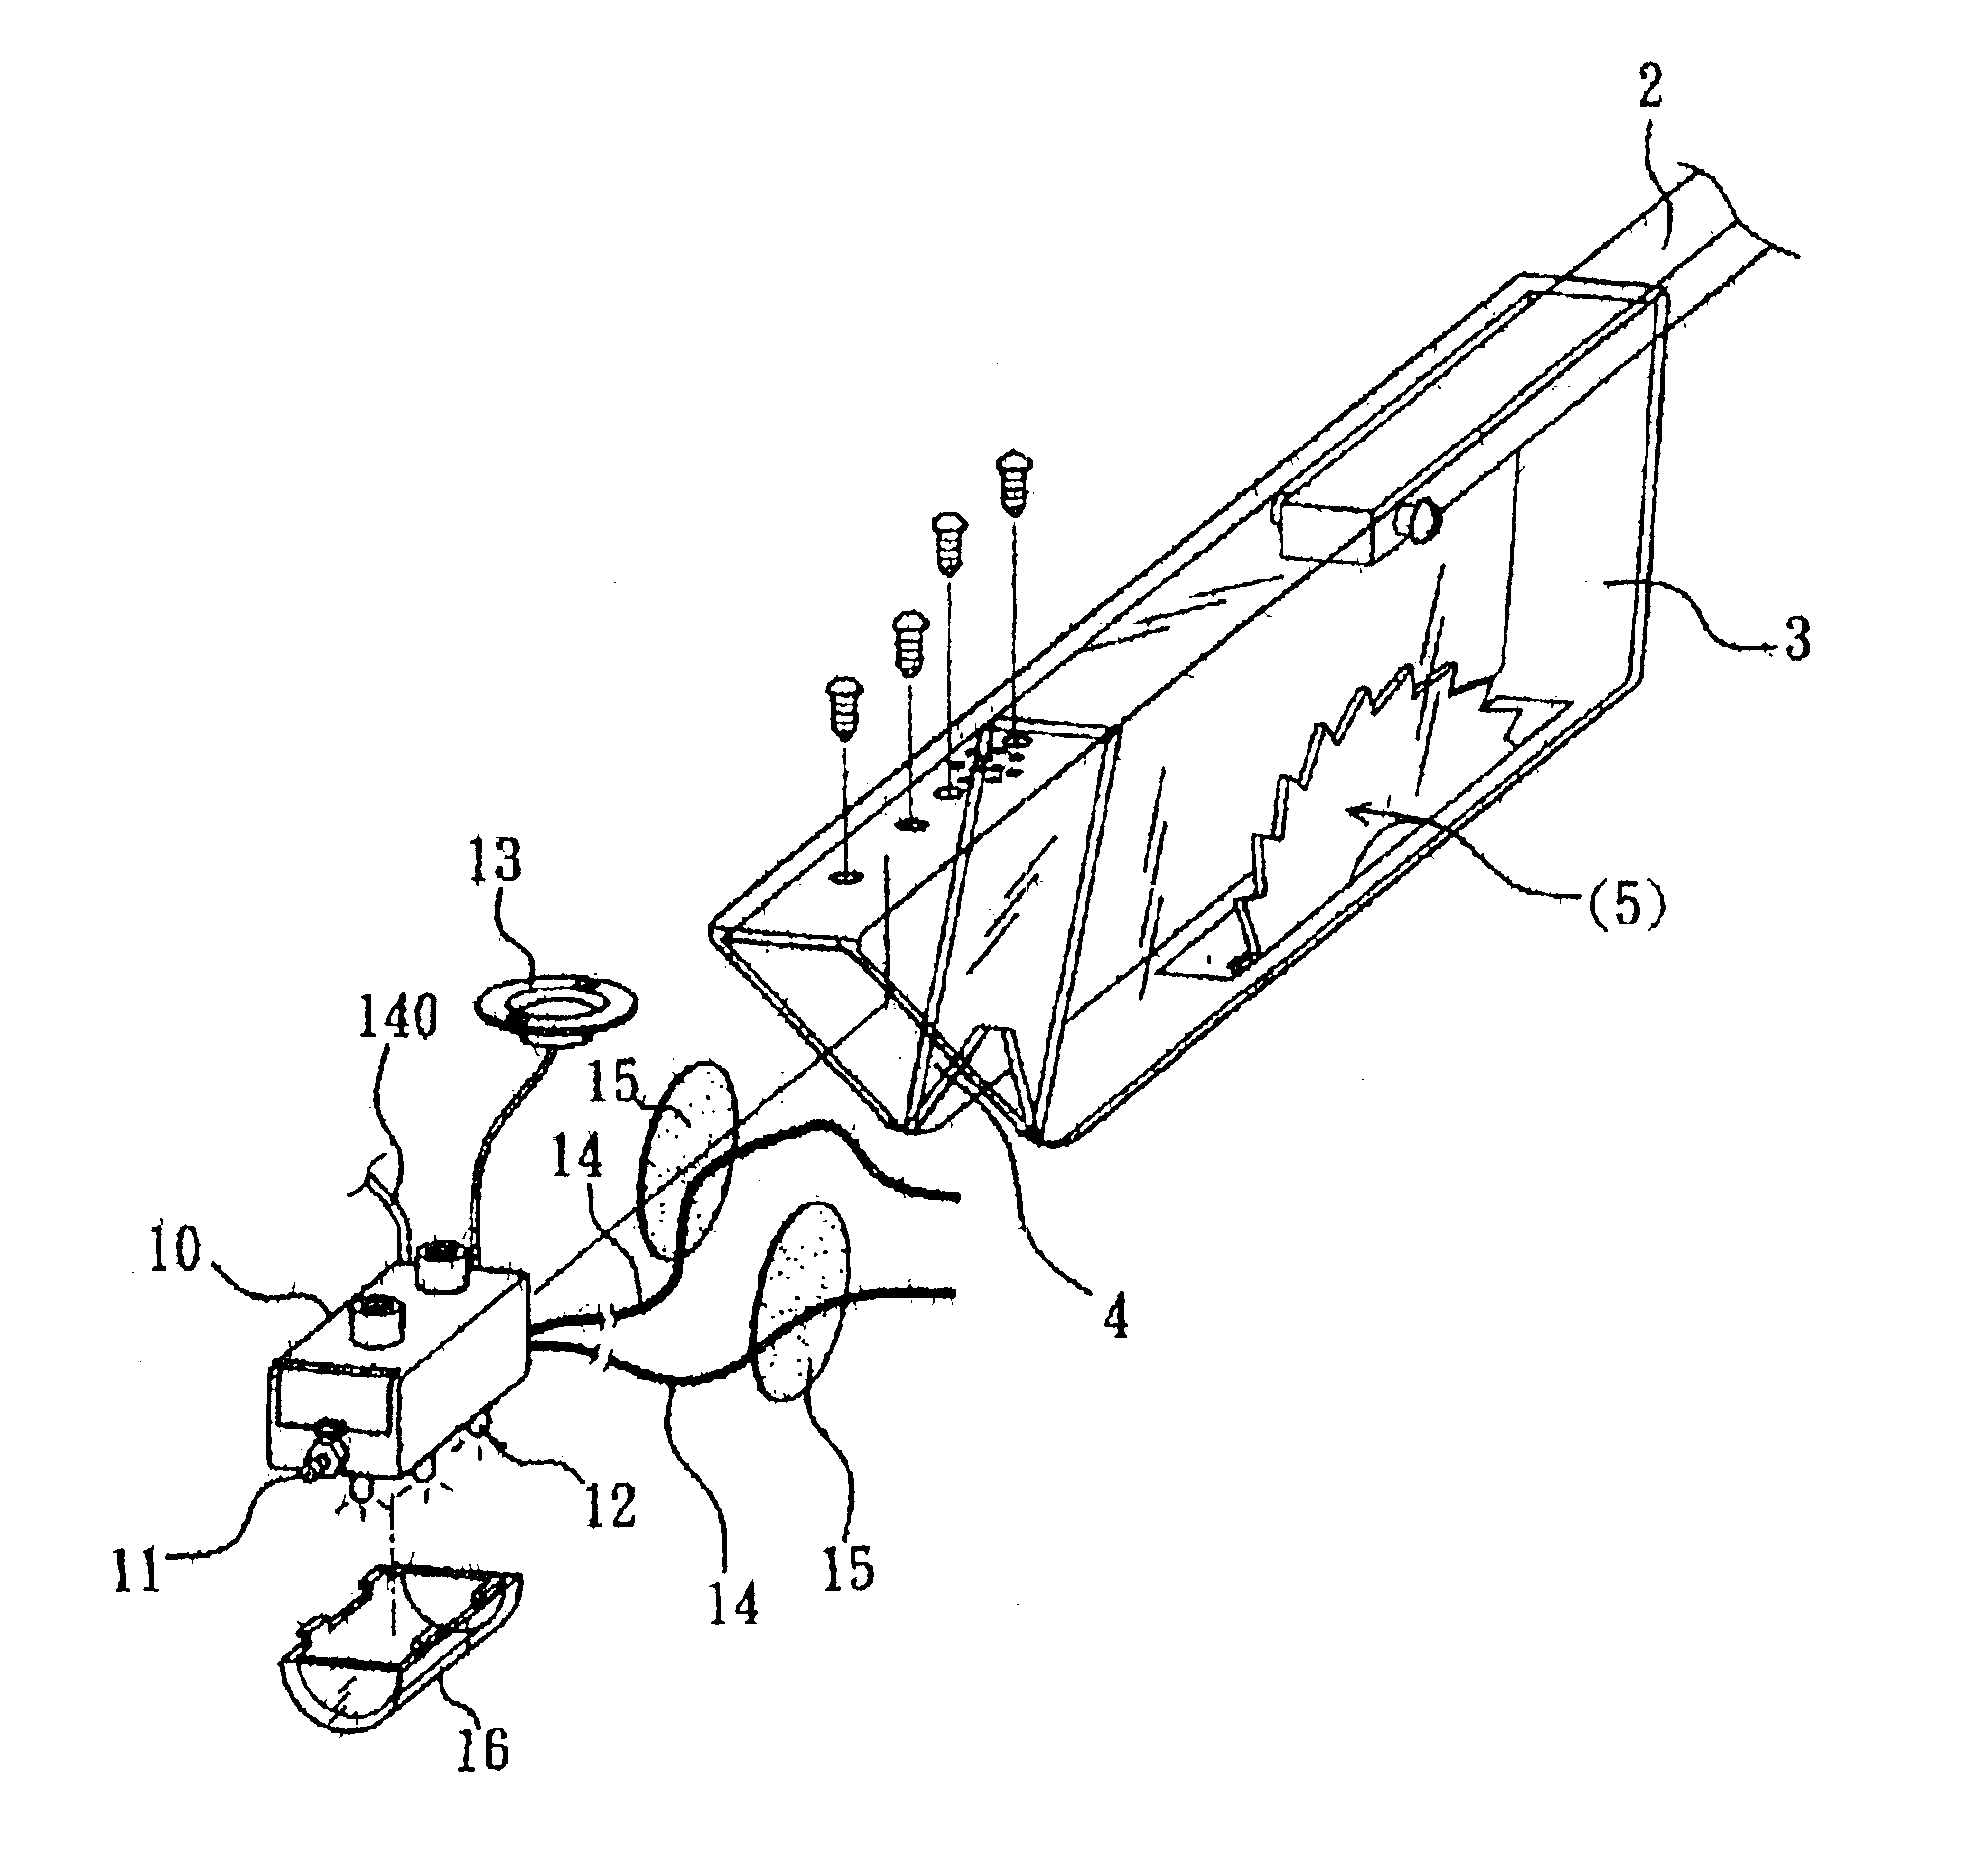 Saw cover safety sensing device